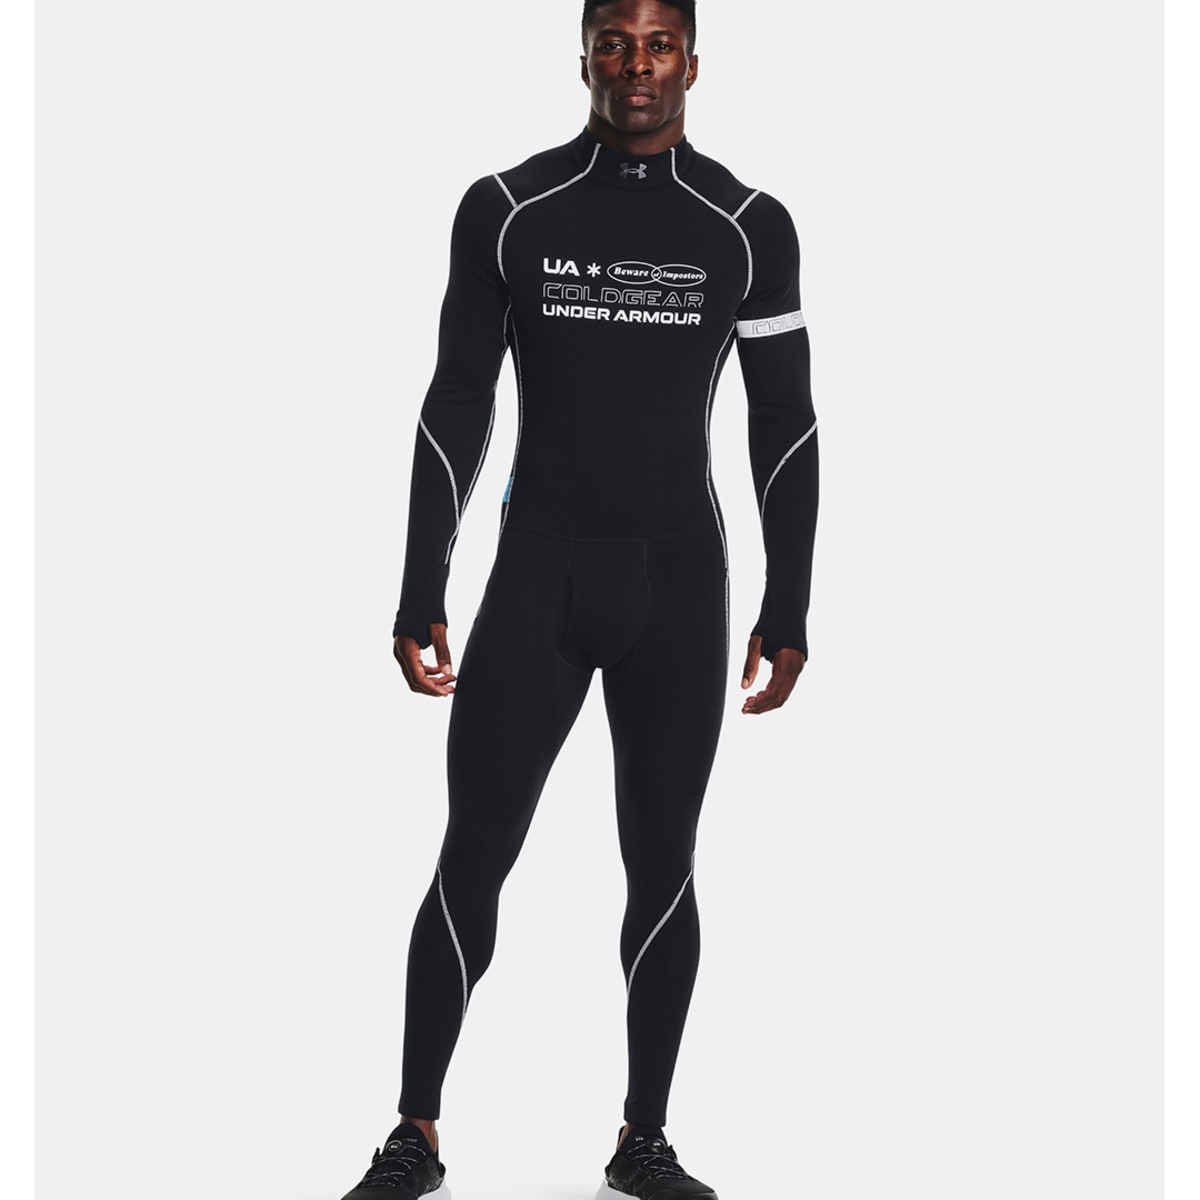 Stay Warm During Your Workout With This ColdGear Select Bodysuit - Men's  Journal